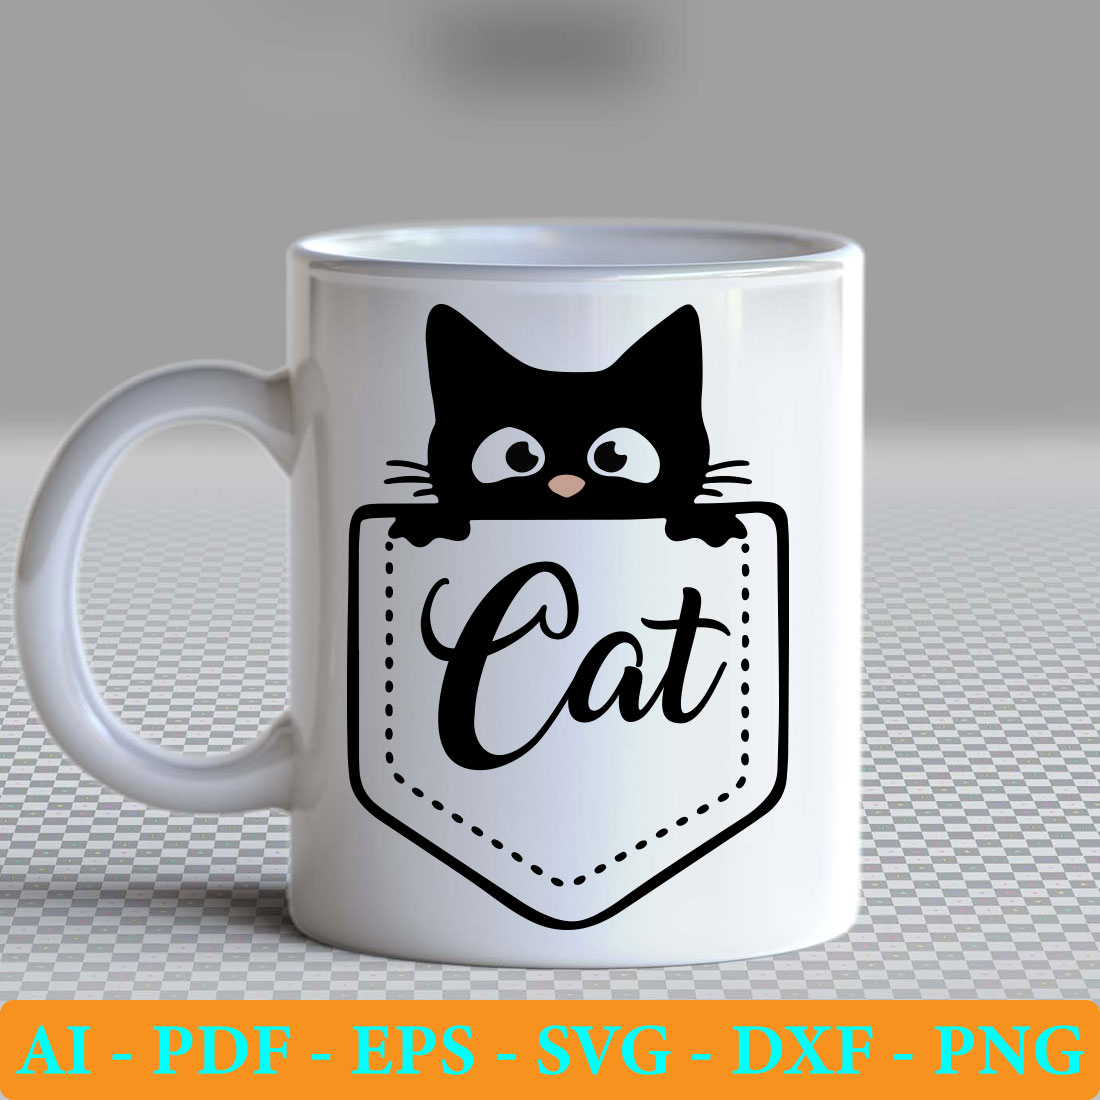 White coffee mug with a black cat in a pocket.